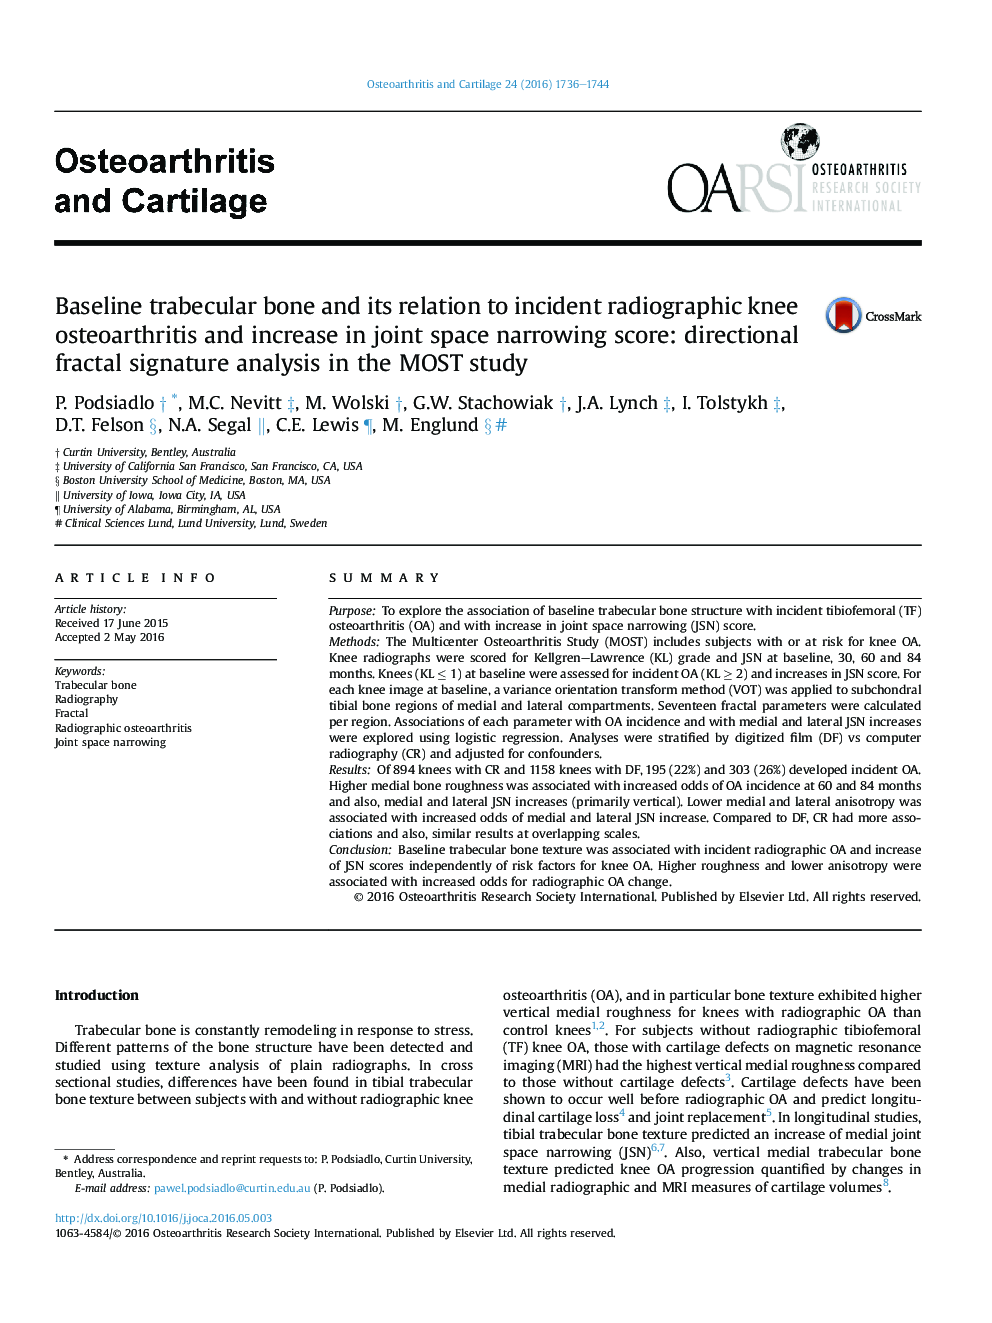 Baseline trabecular bone and its relation to incident radiographic knee osteoarthritis and increase in joint space narrowing score: directional fractal signature analysis in the MOST study